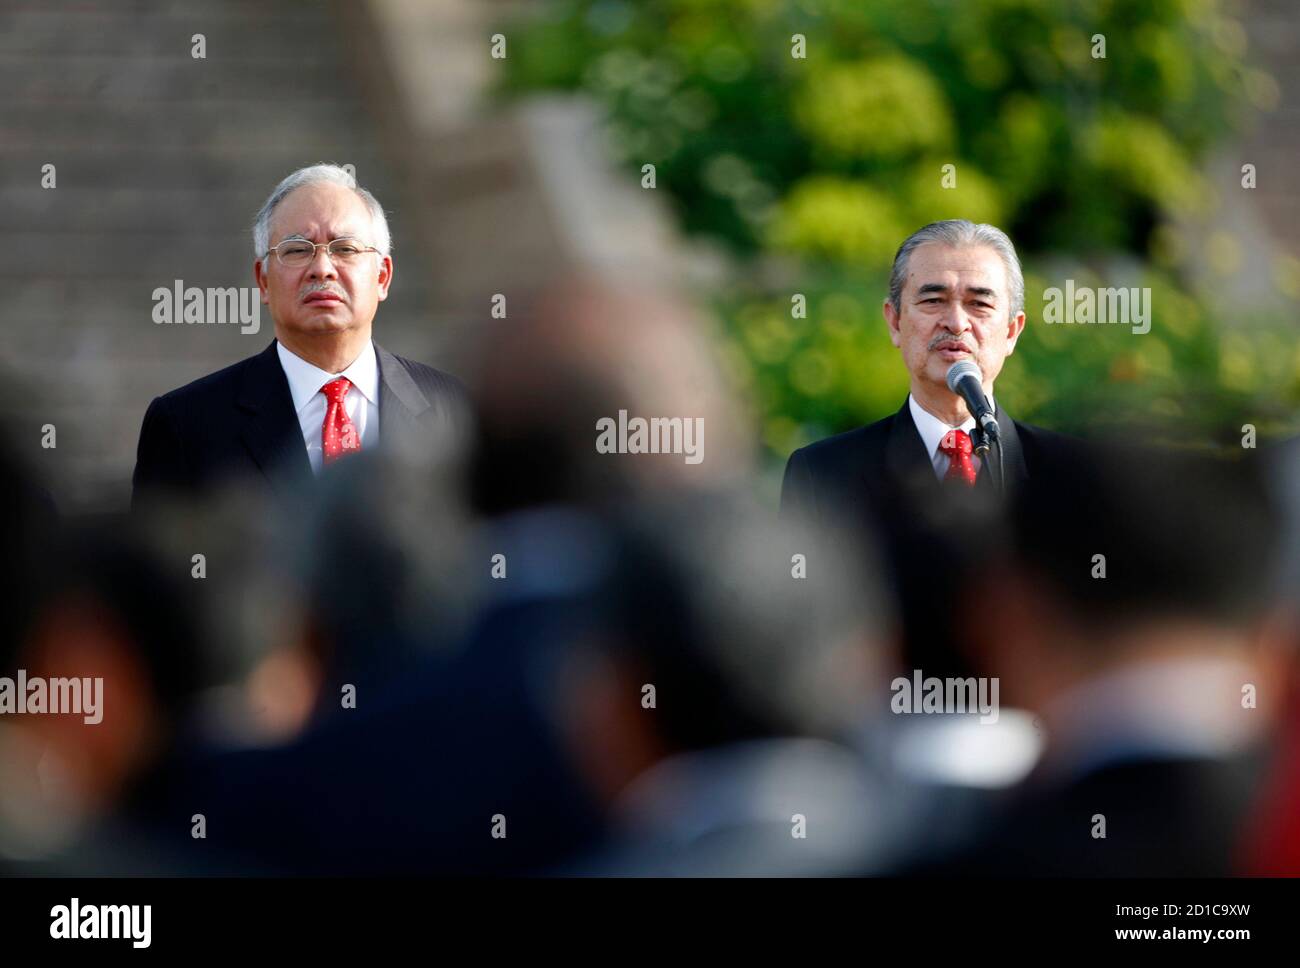 Malaysia's prime minister-in-waiting Najib Razak (L) listens to Prime Minister Abdullah Ahmad Badawi during a Prime Minister Department gathering in Putrajaya, outside Kuala Lumpur December 1, 2008. Abdullah is to step down in March next year and he has endorsed Najib as his successor. REUTERS/Bazuki Muhammad (MALAYSIA) Stock Photo